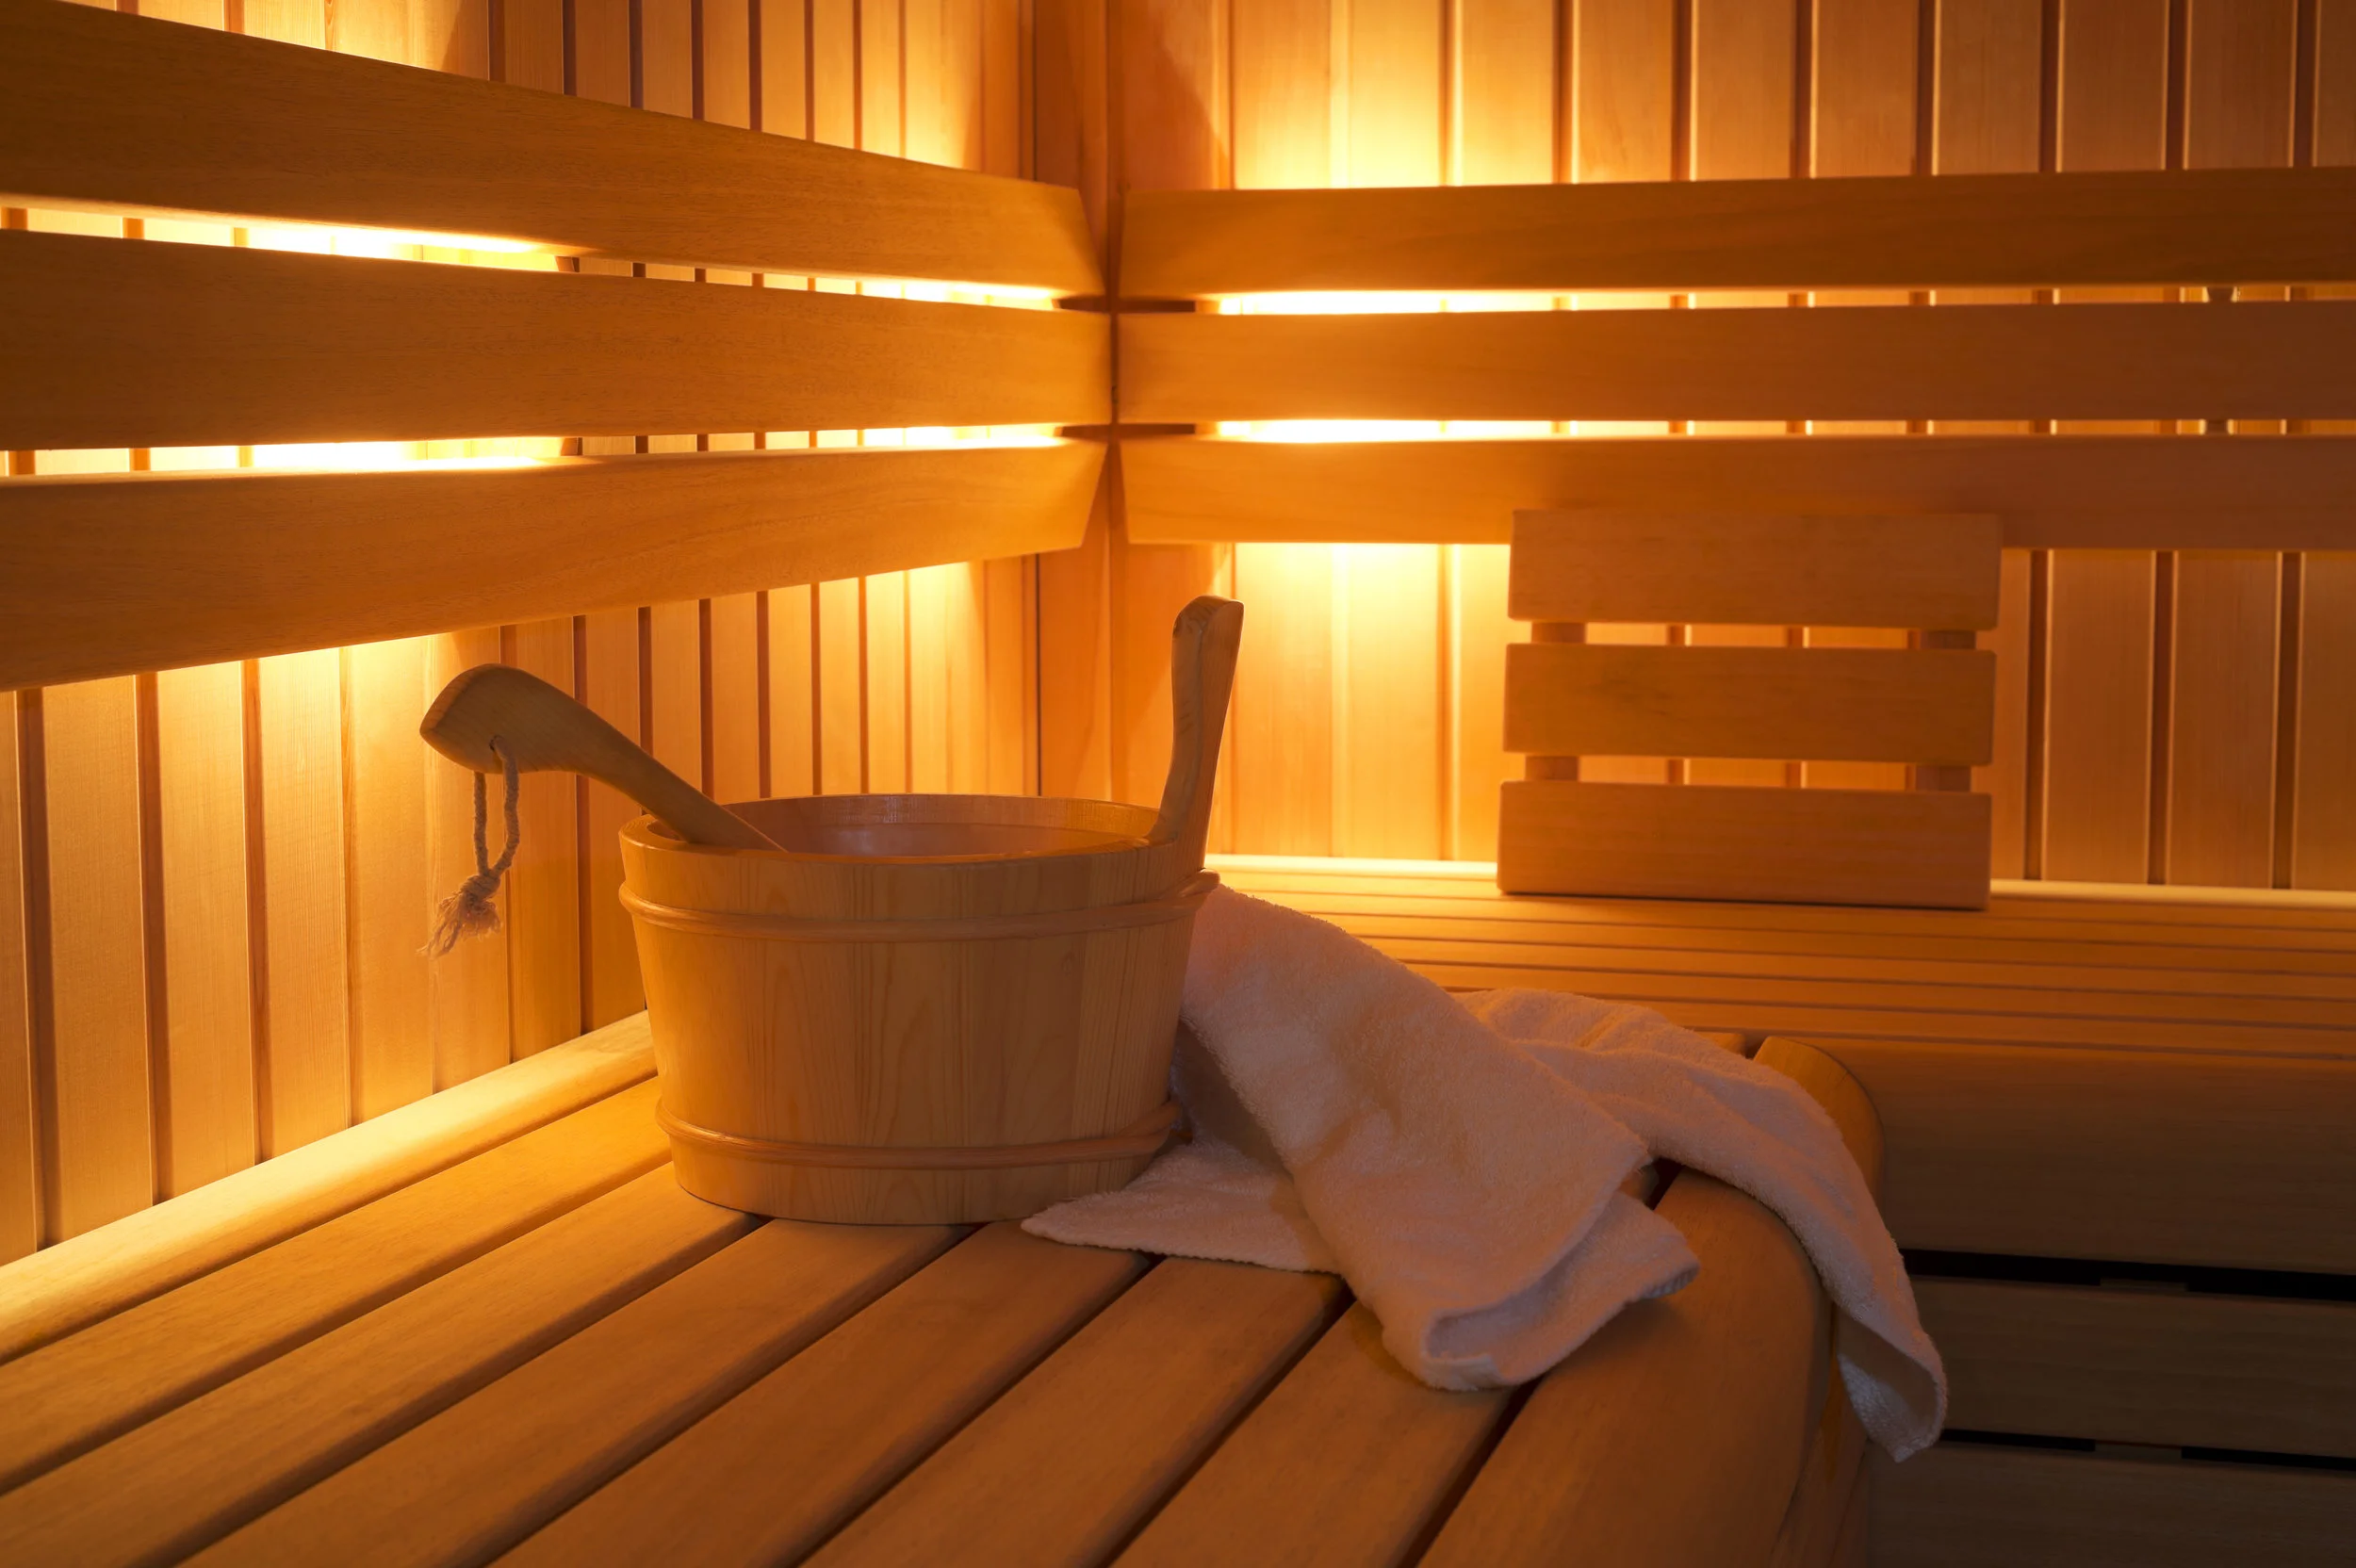 Embrace the Summer Heat with Sauna: The Perfect Season for Dispelling Winter Chill